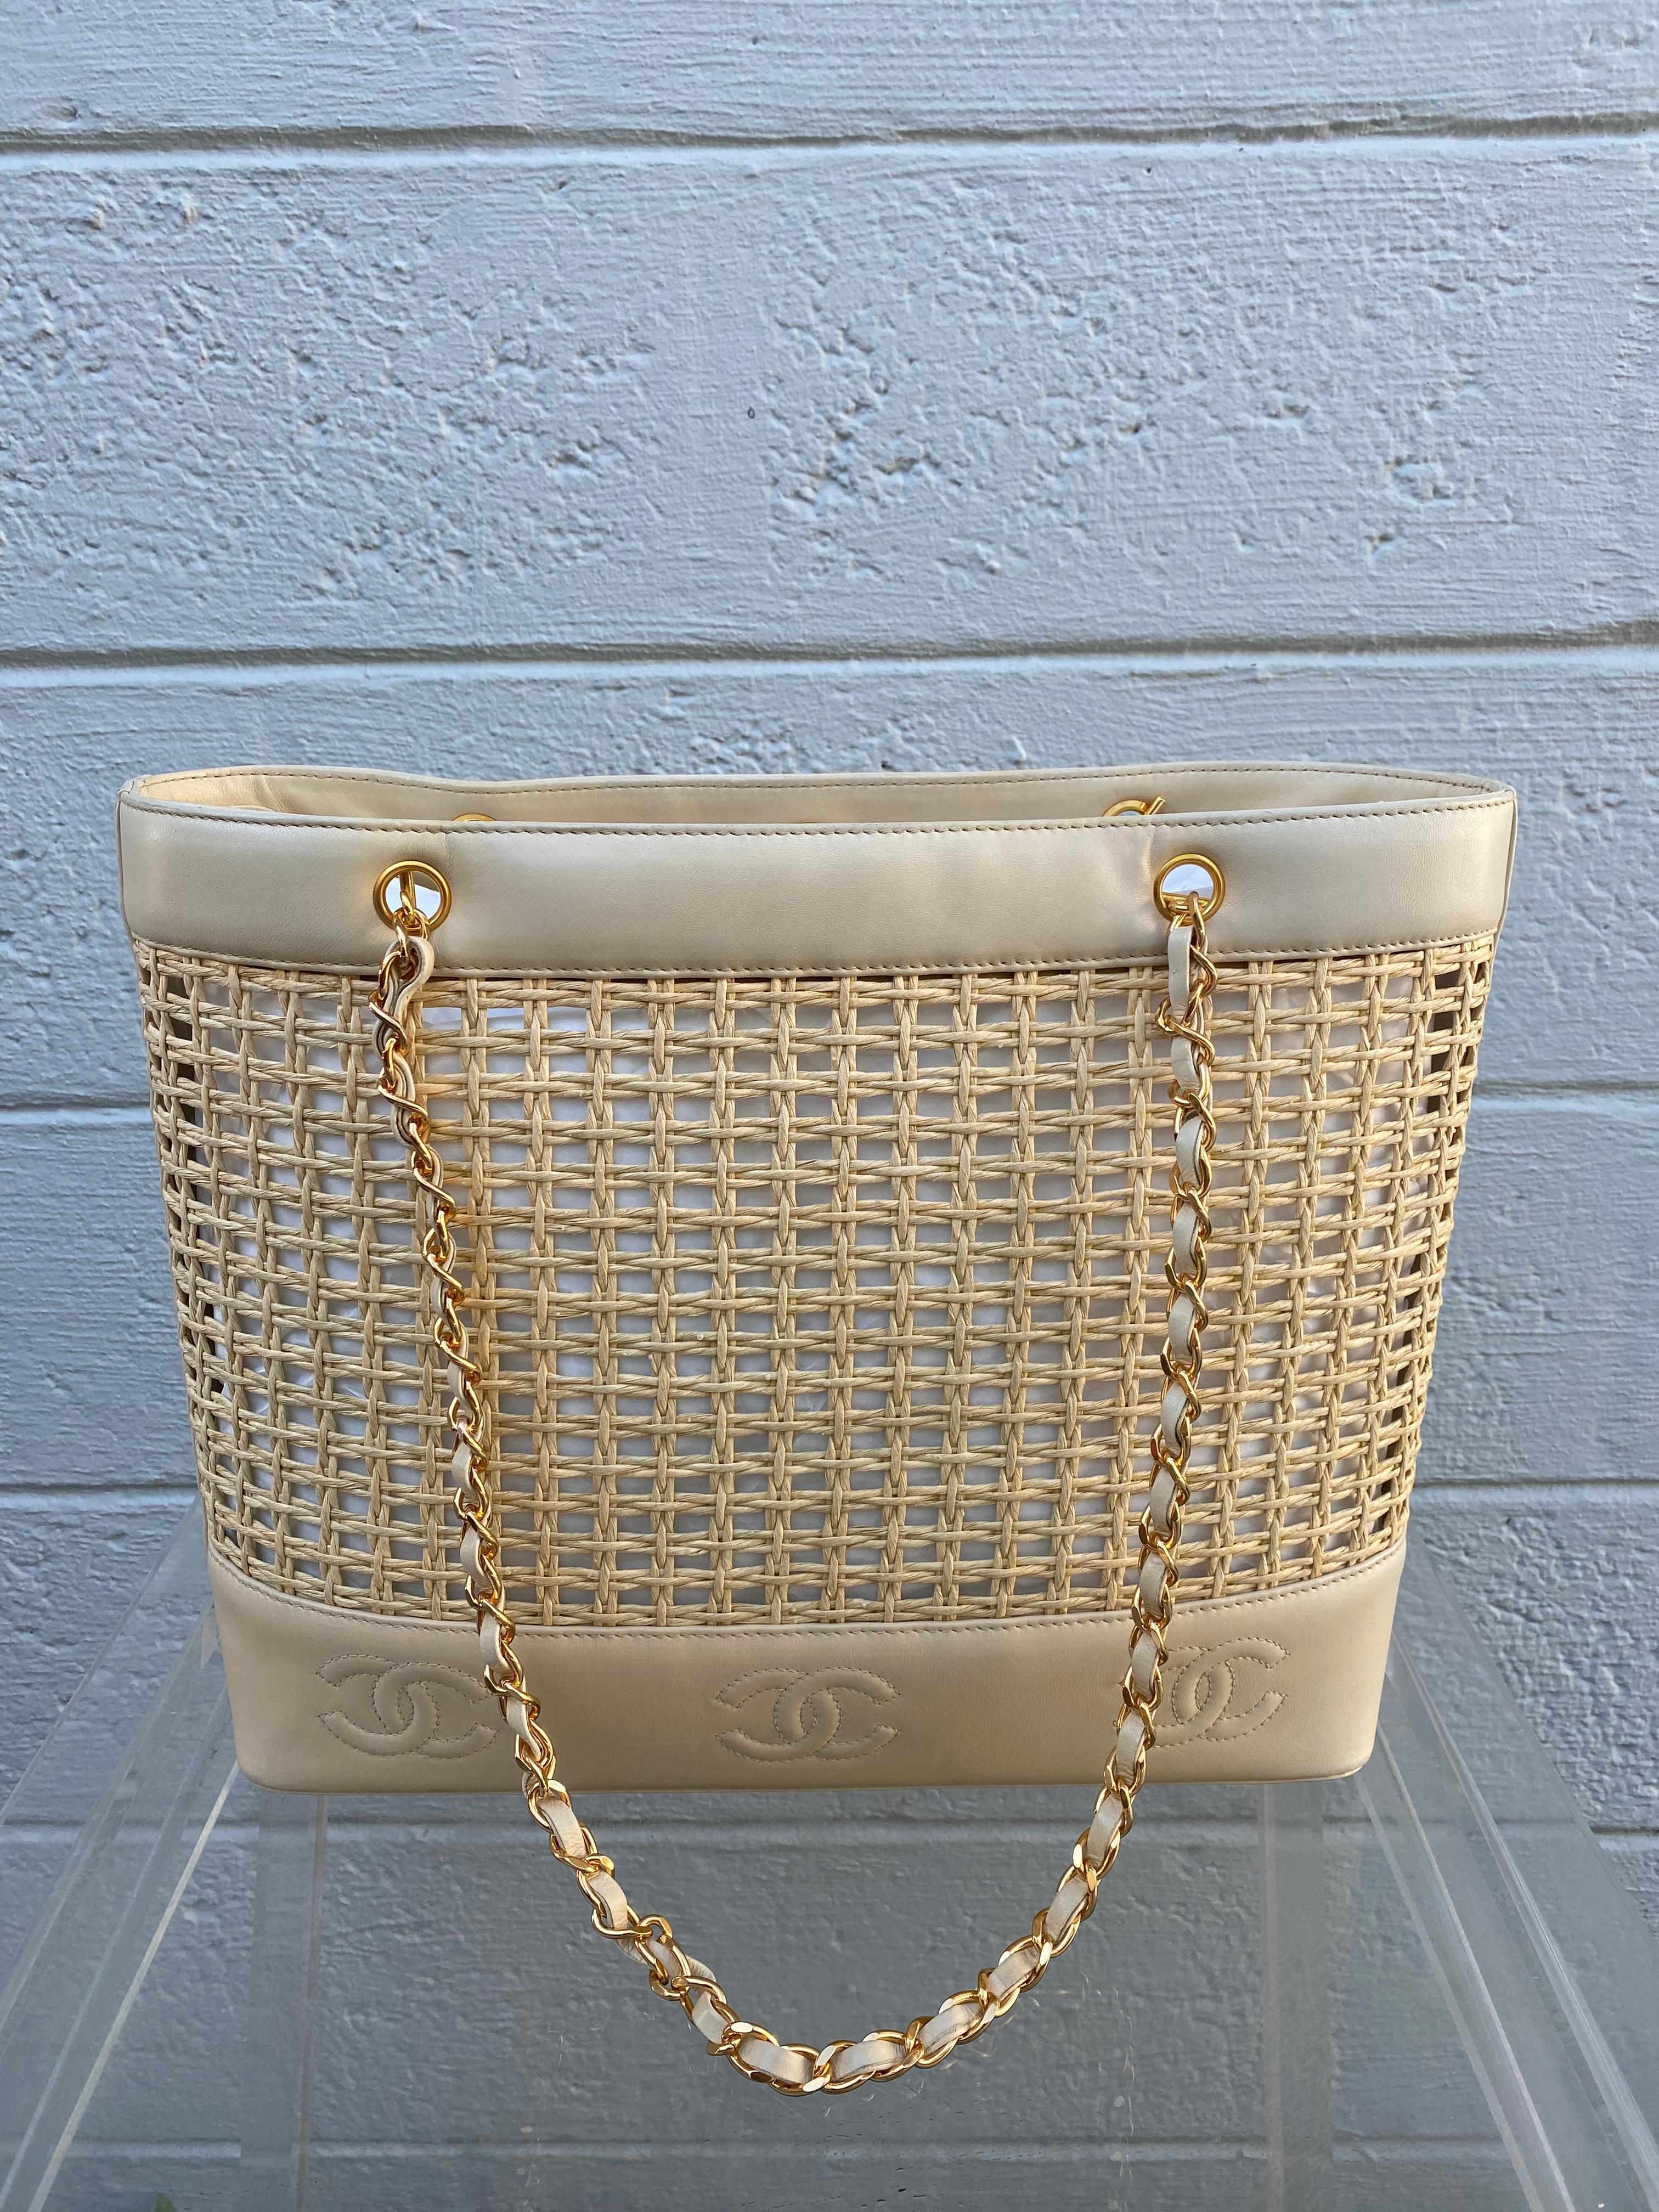 Vintage Rare Chanel Woven Straw Lambskin Beige Shopper Tote  In Excellent Condition For Sale In Fort Lauderdale, FL